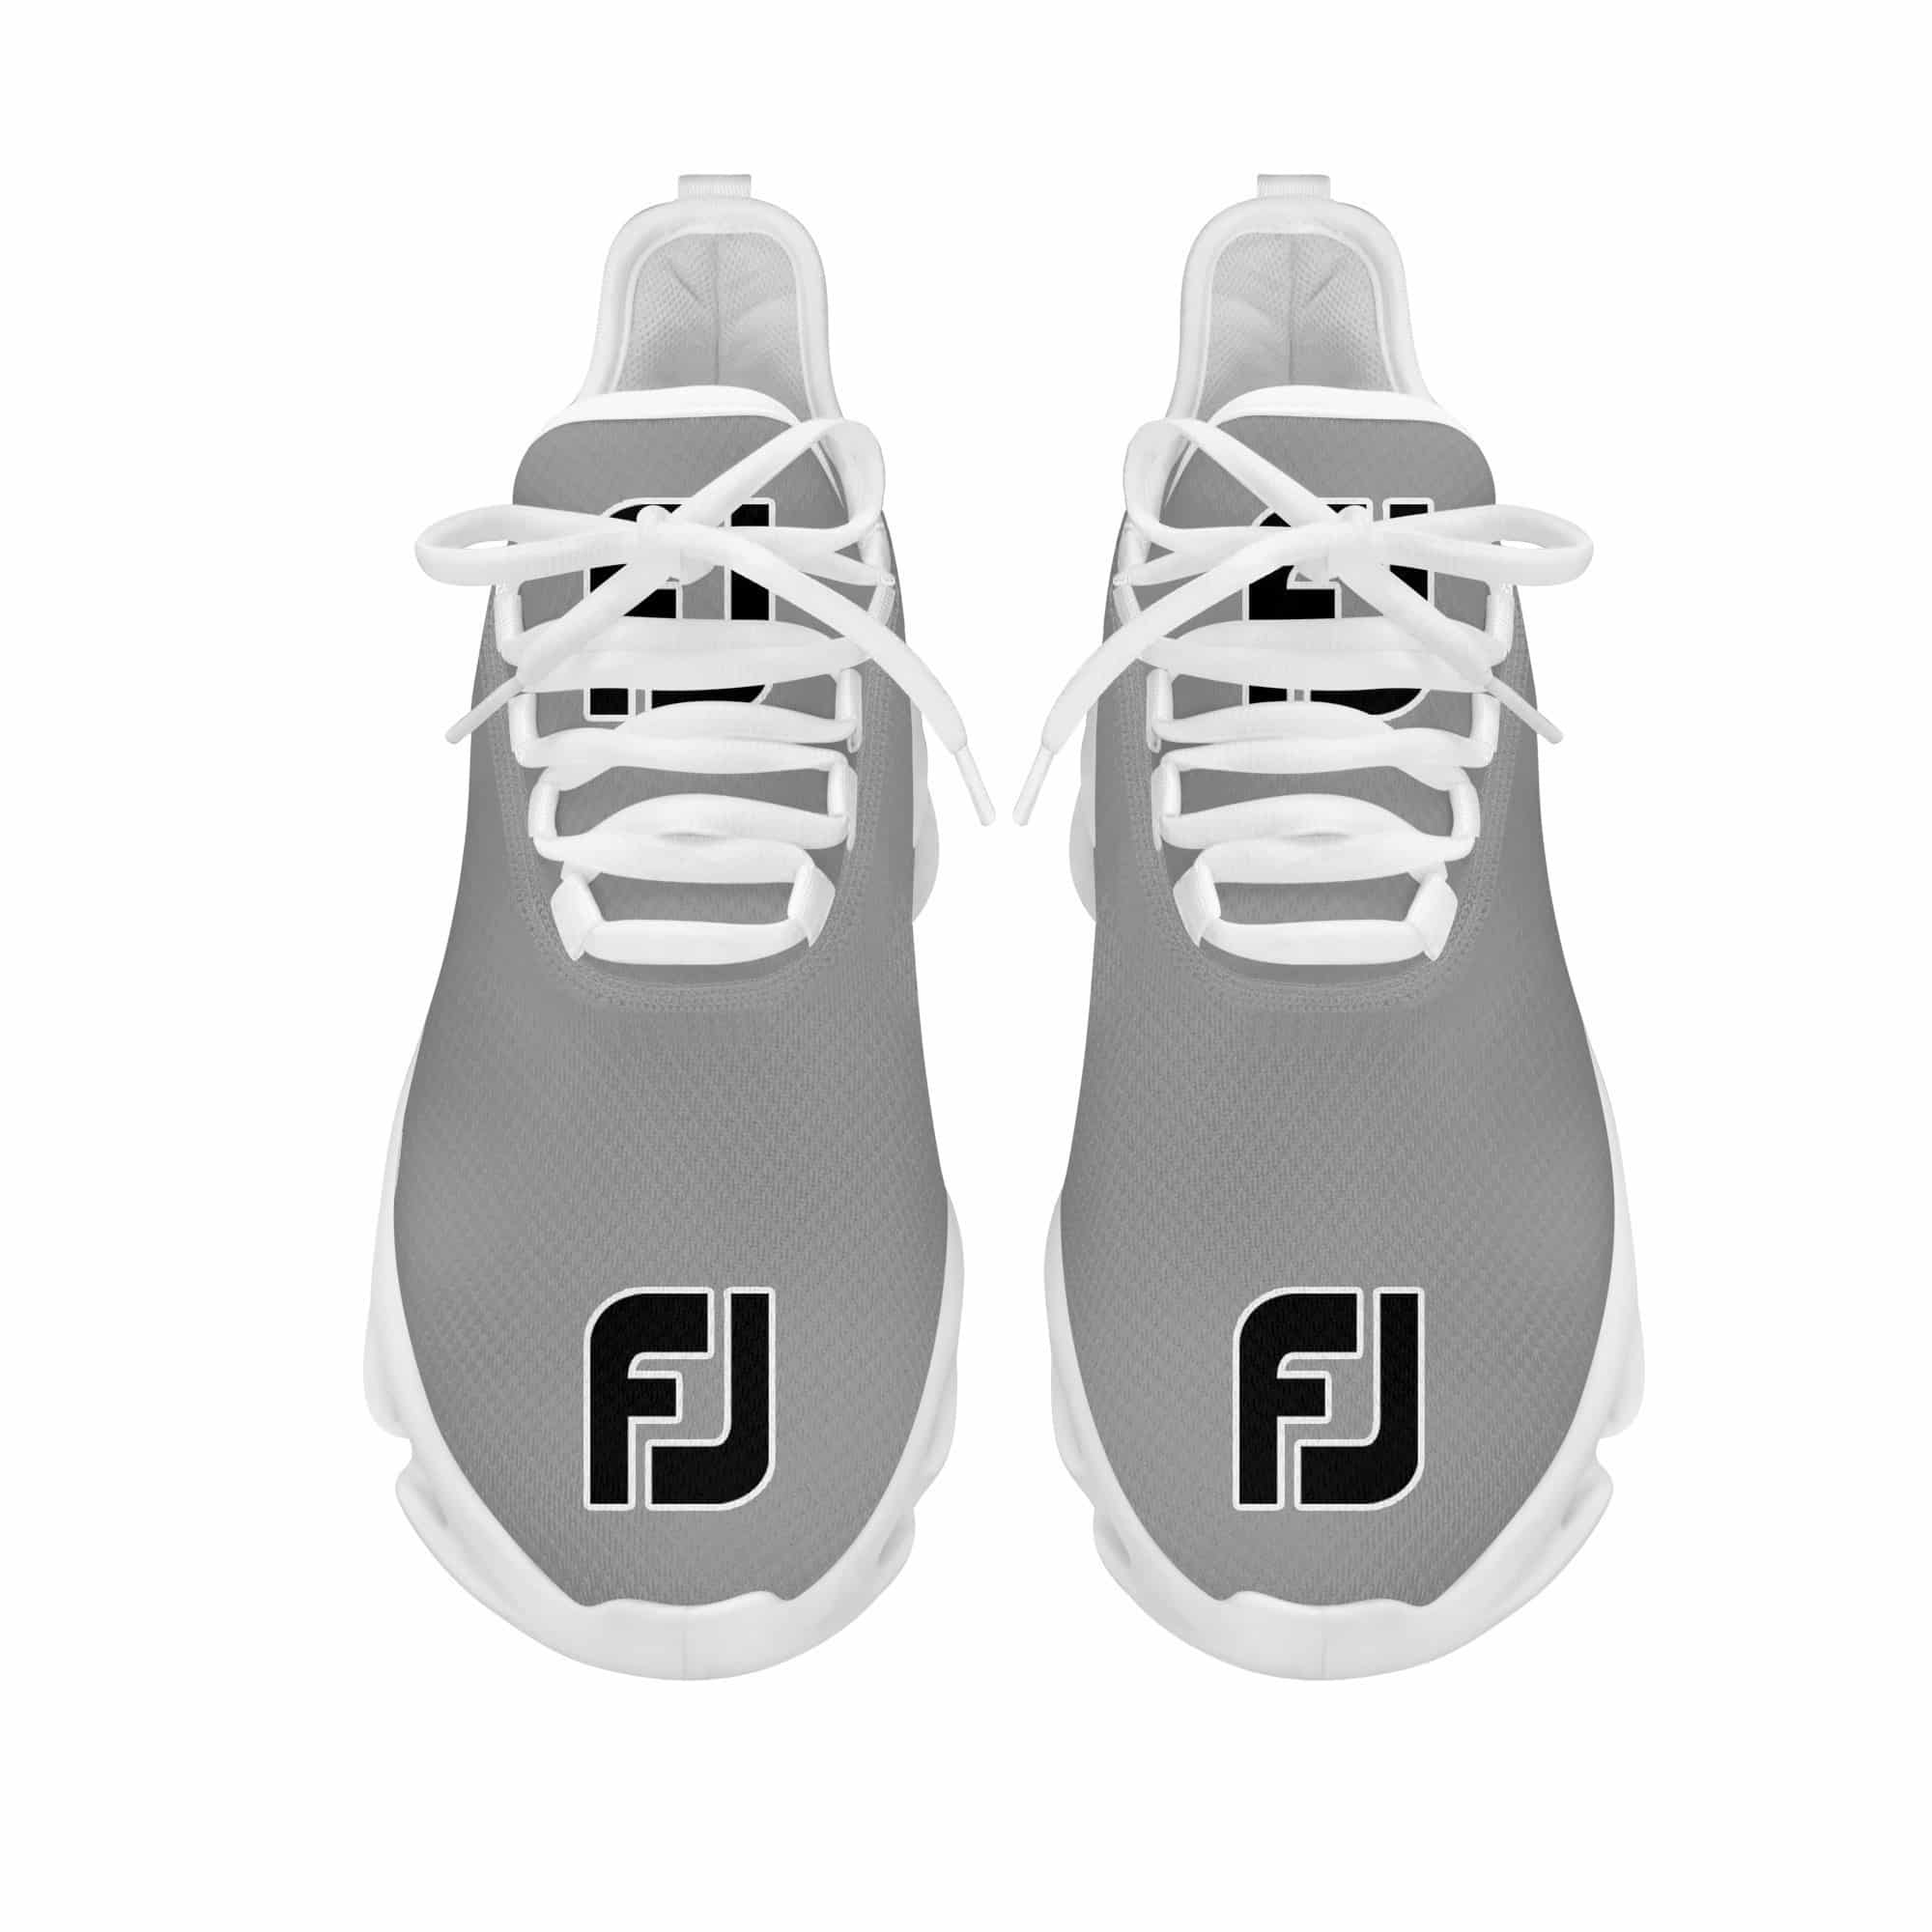 Fj Titleist Running Shoes Max Soul Shoes Sneakers Ver 6 4